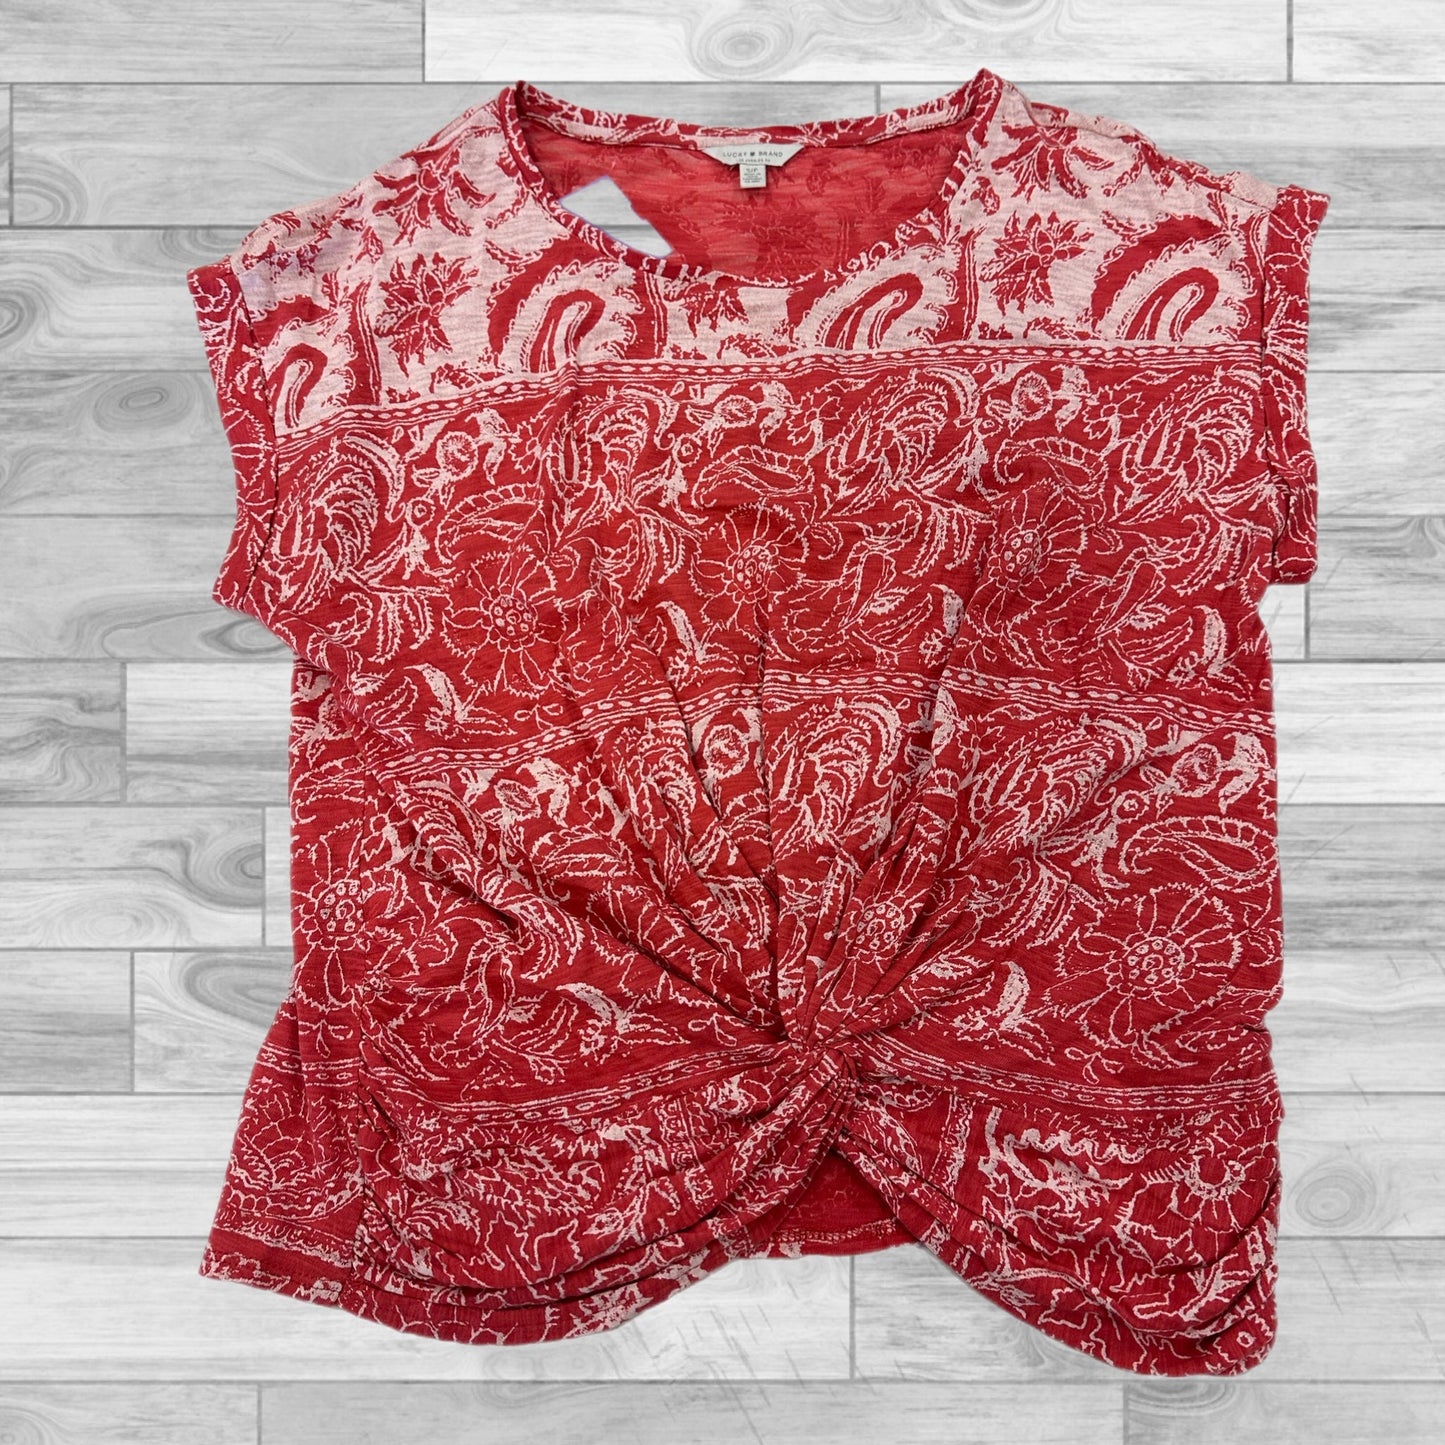 Red Top Short Sleeve Lucky Brand, Size S